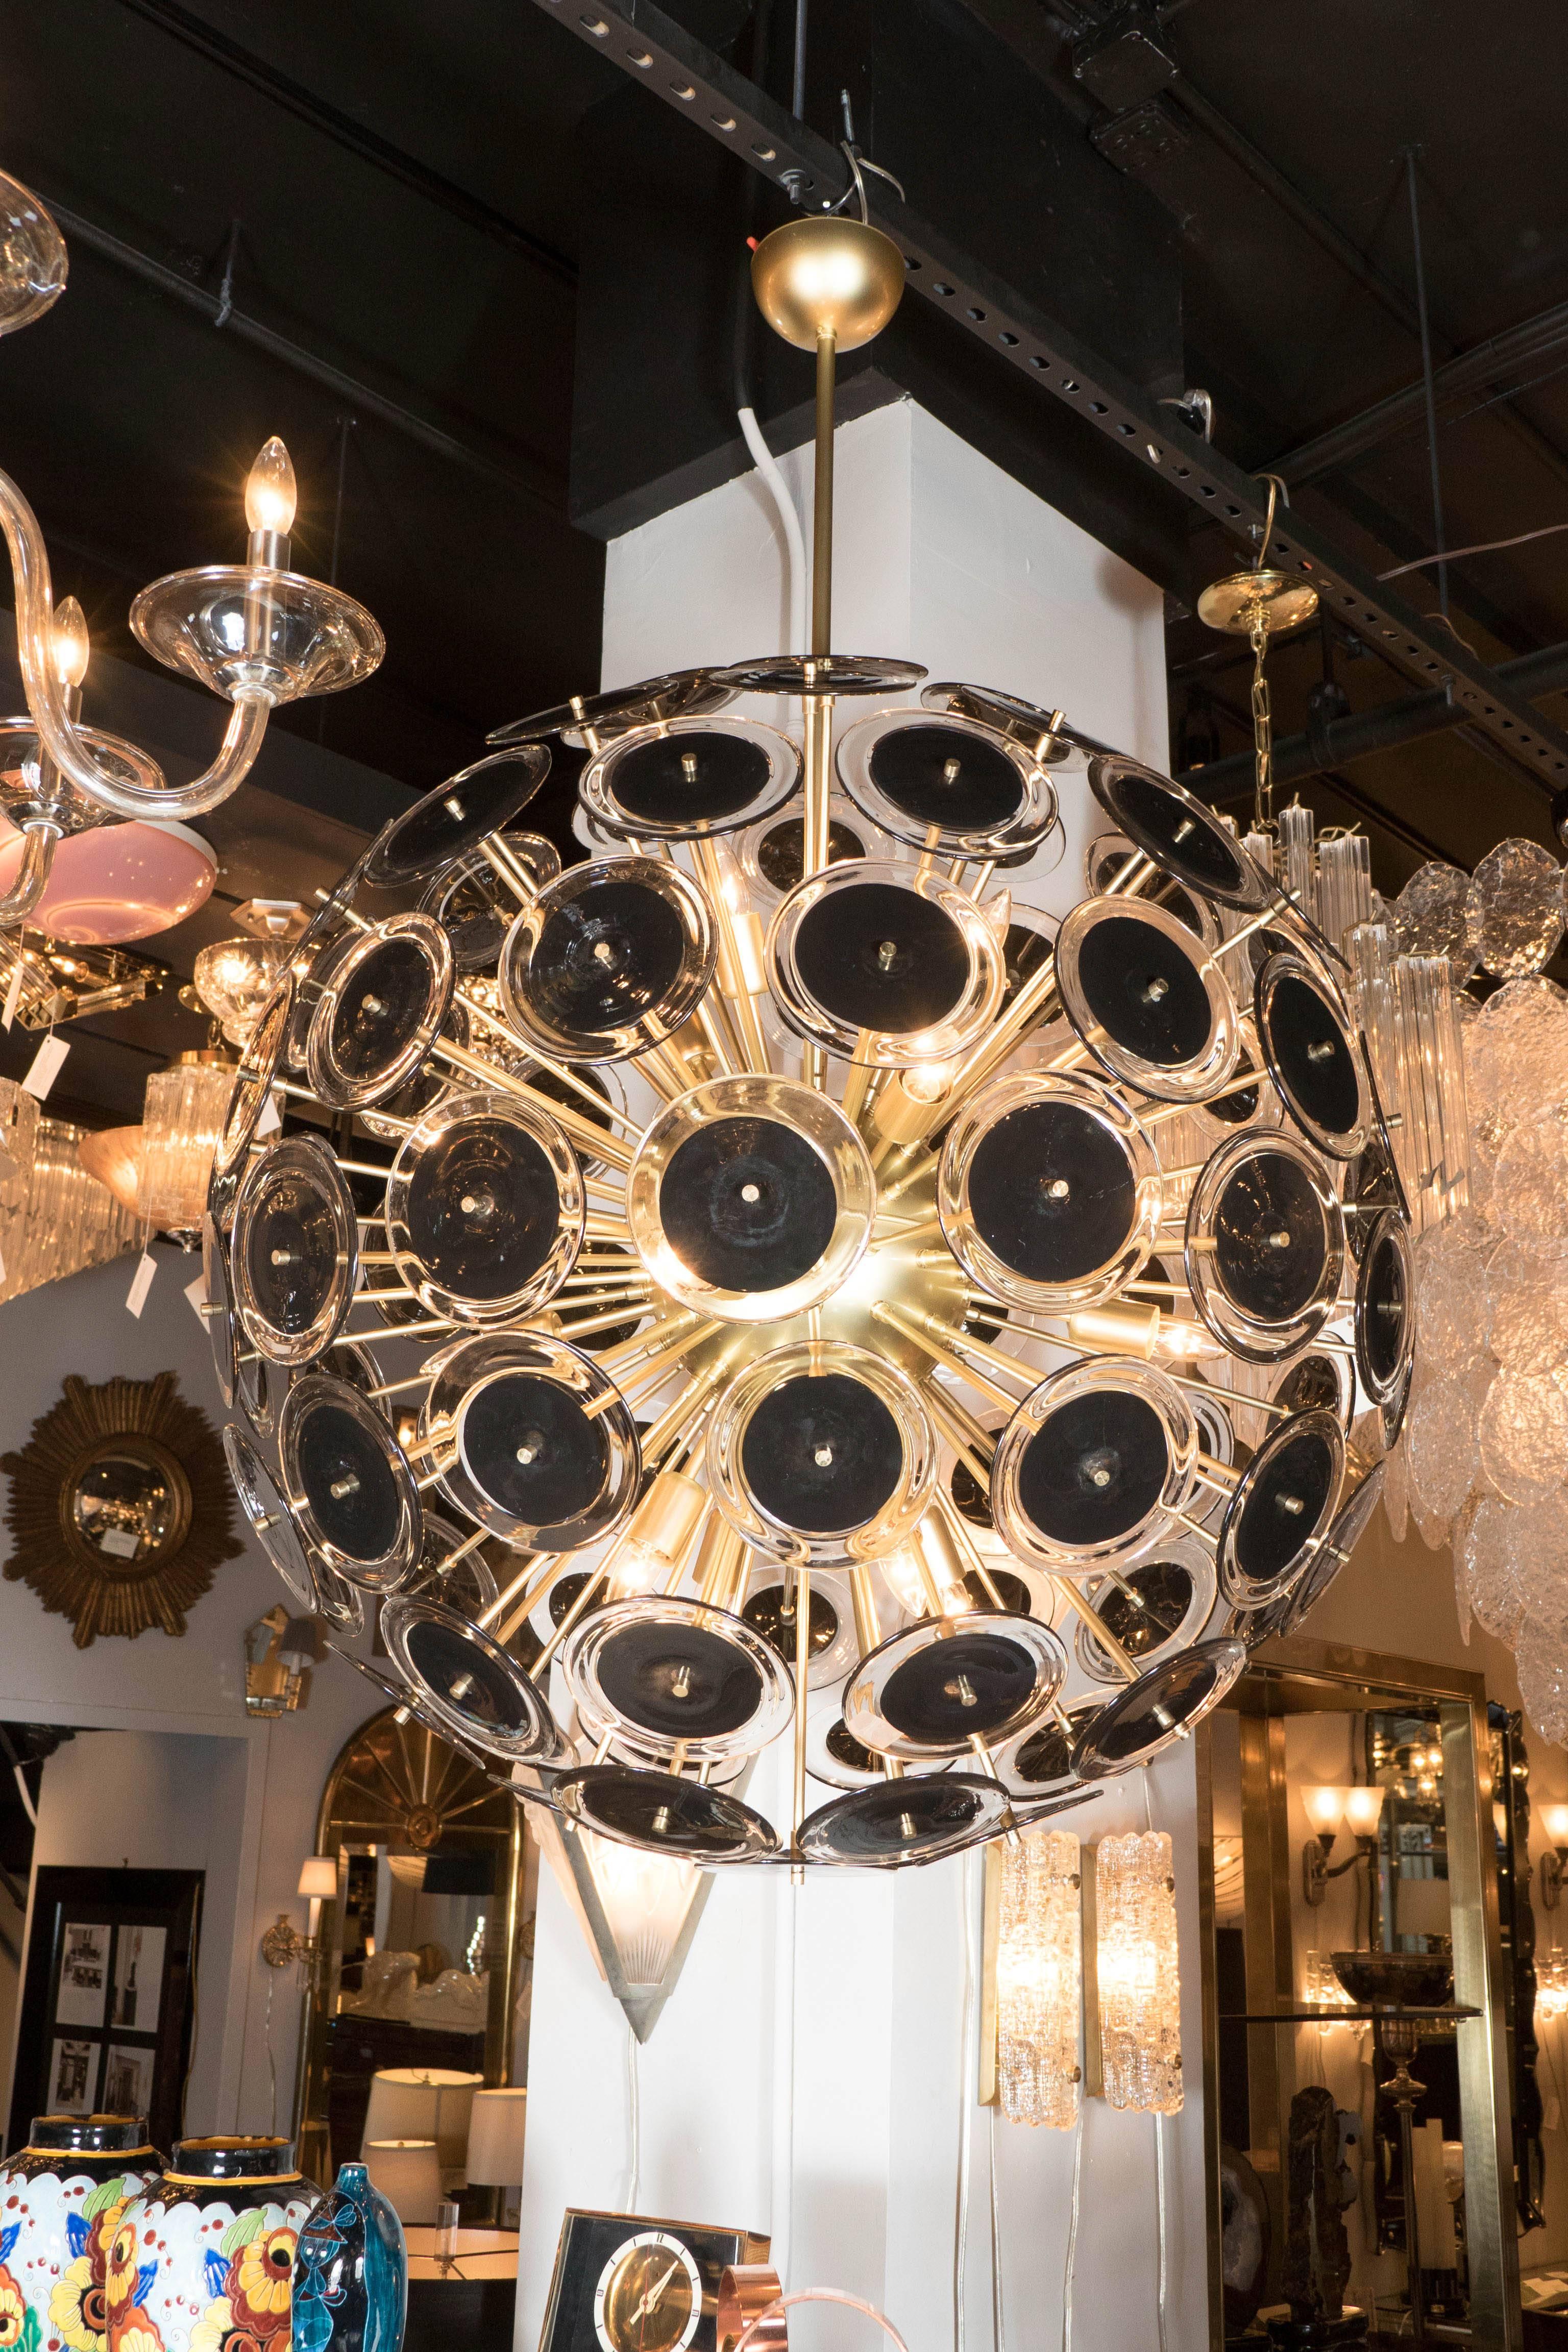 This outstanding modernist Sputnik chandelier style of Vistosi, features a satin finished brass frame with a spherical core from which numerous rods emanate. At the end of each rod is a hand blown Murano glass disc with a black center with clear